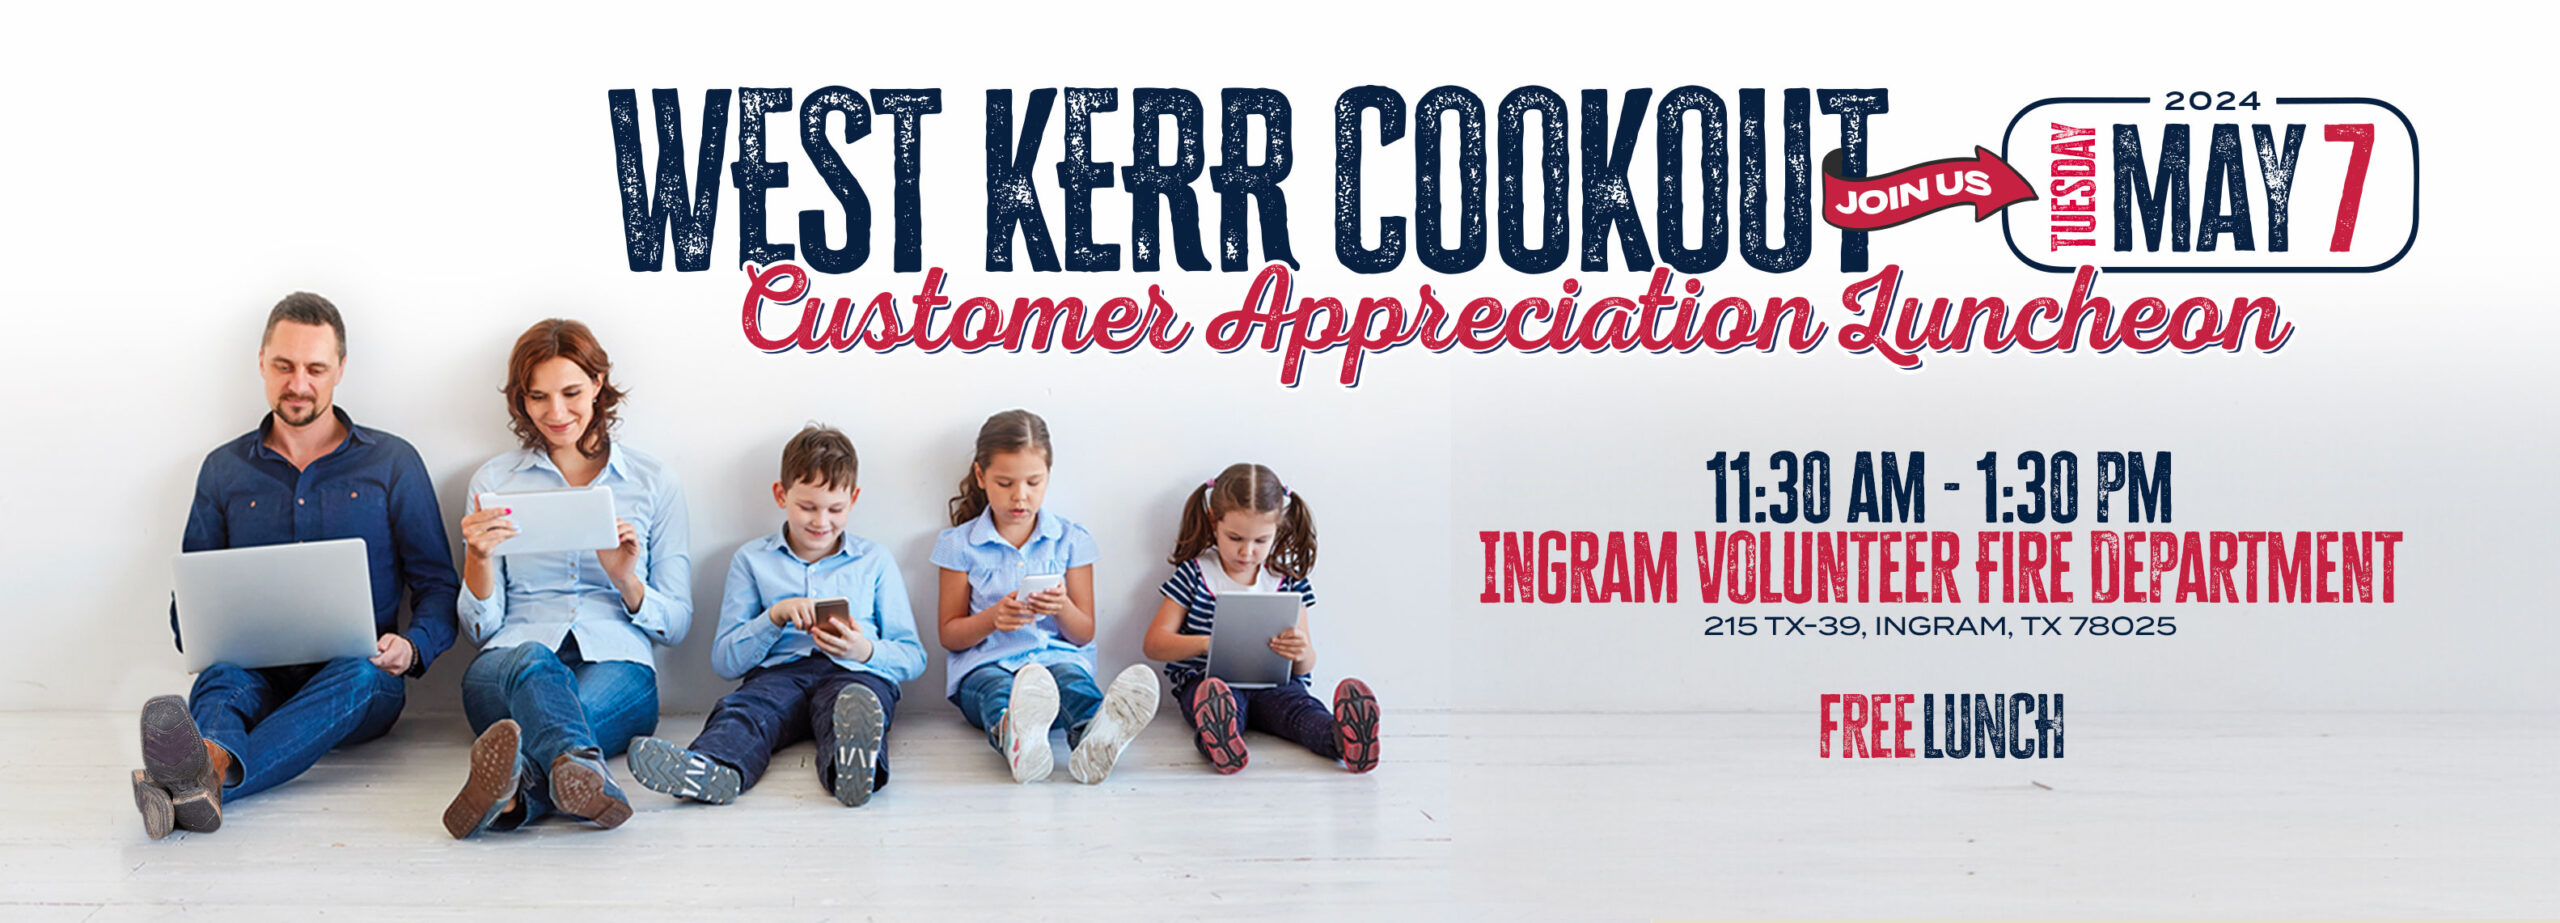 West Kerr Cookout - Tuesday May 7, 2024, Customer Appreciation Luncheon